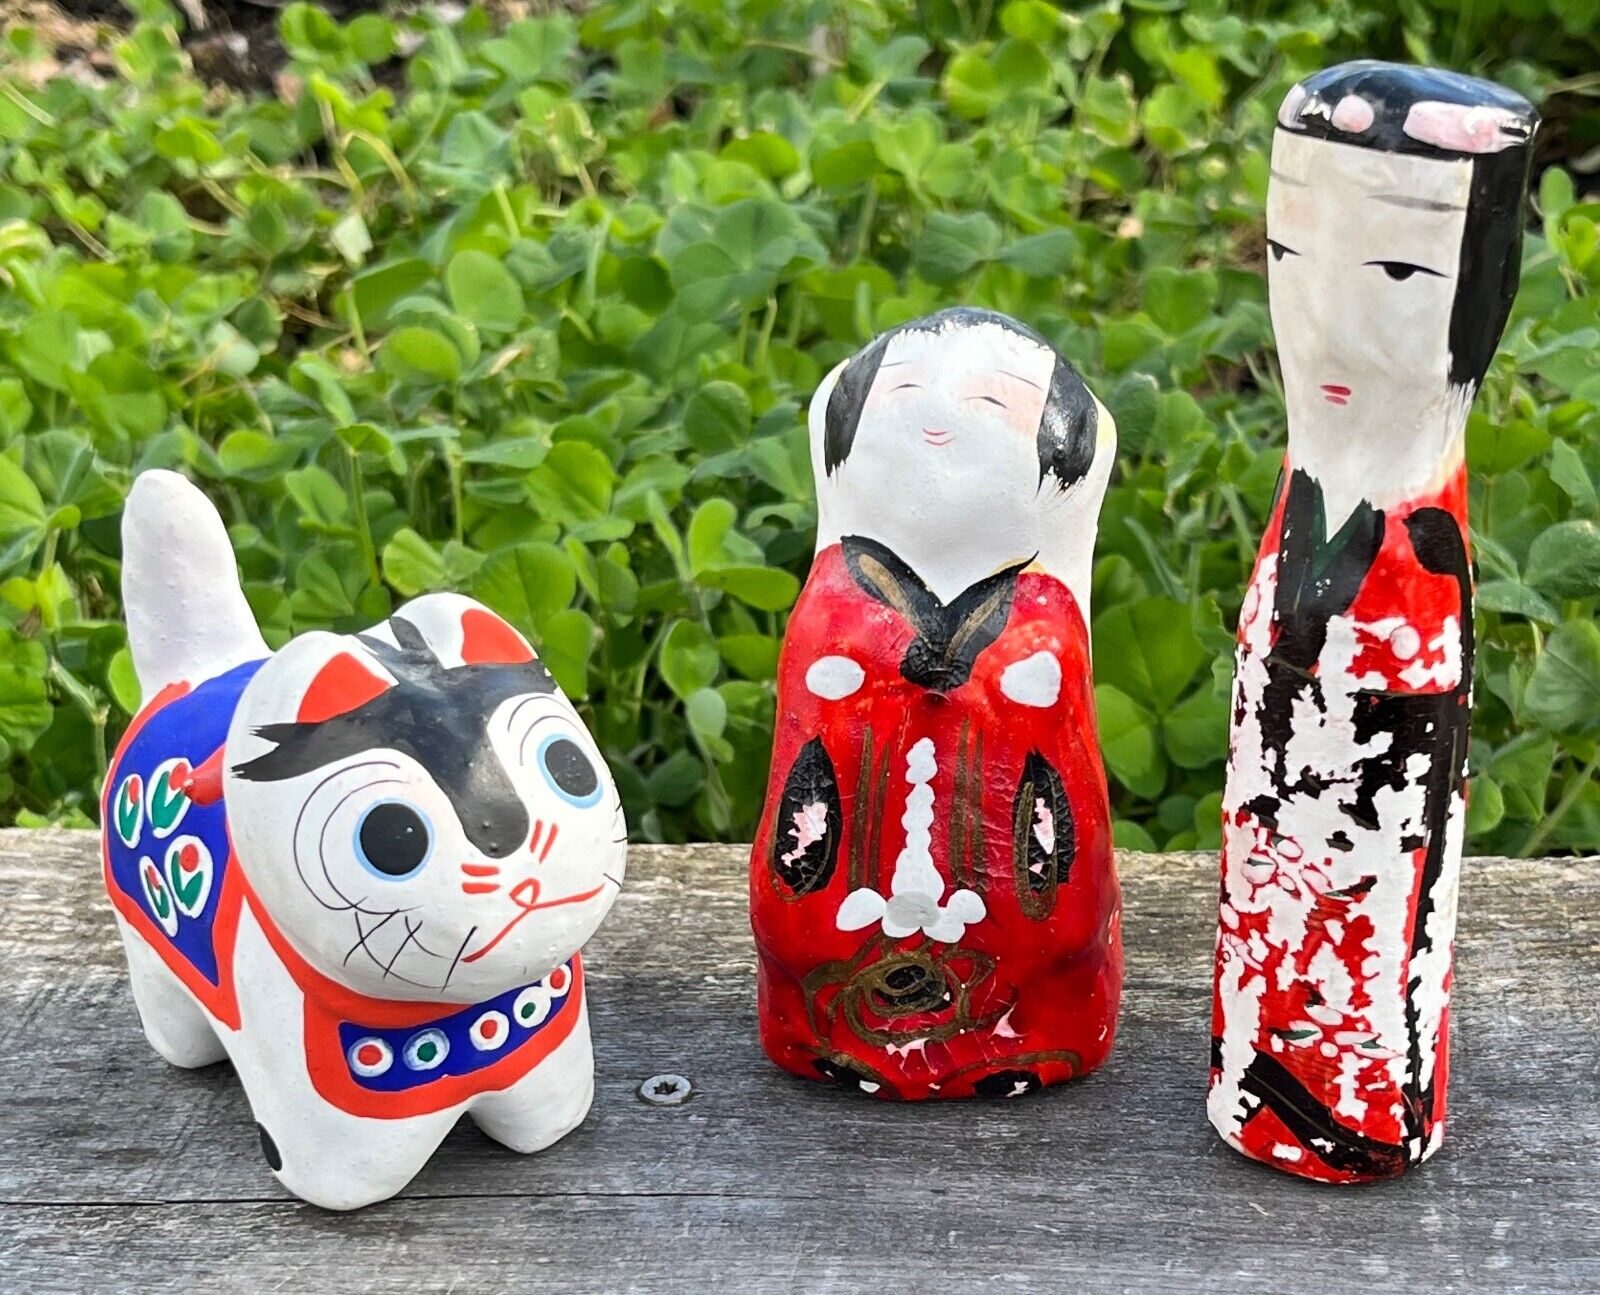 Lot of 3 Vintage Japanese Paper Mache Figurines: Happy Woman + Dog + Tall Friend